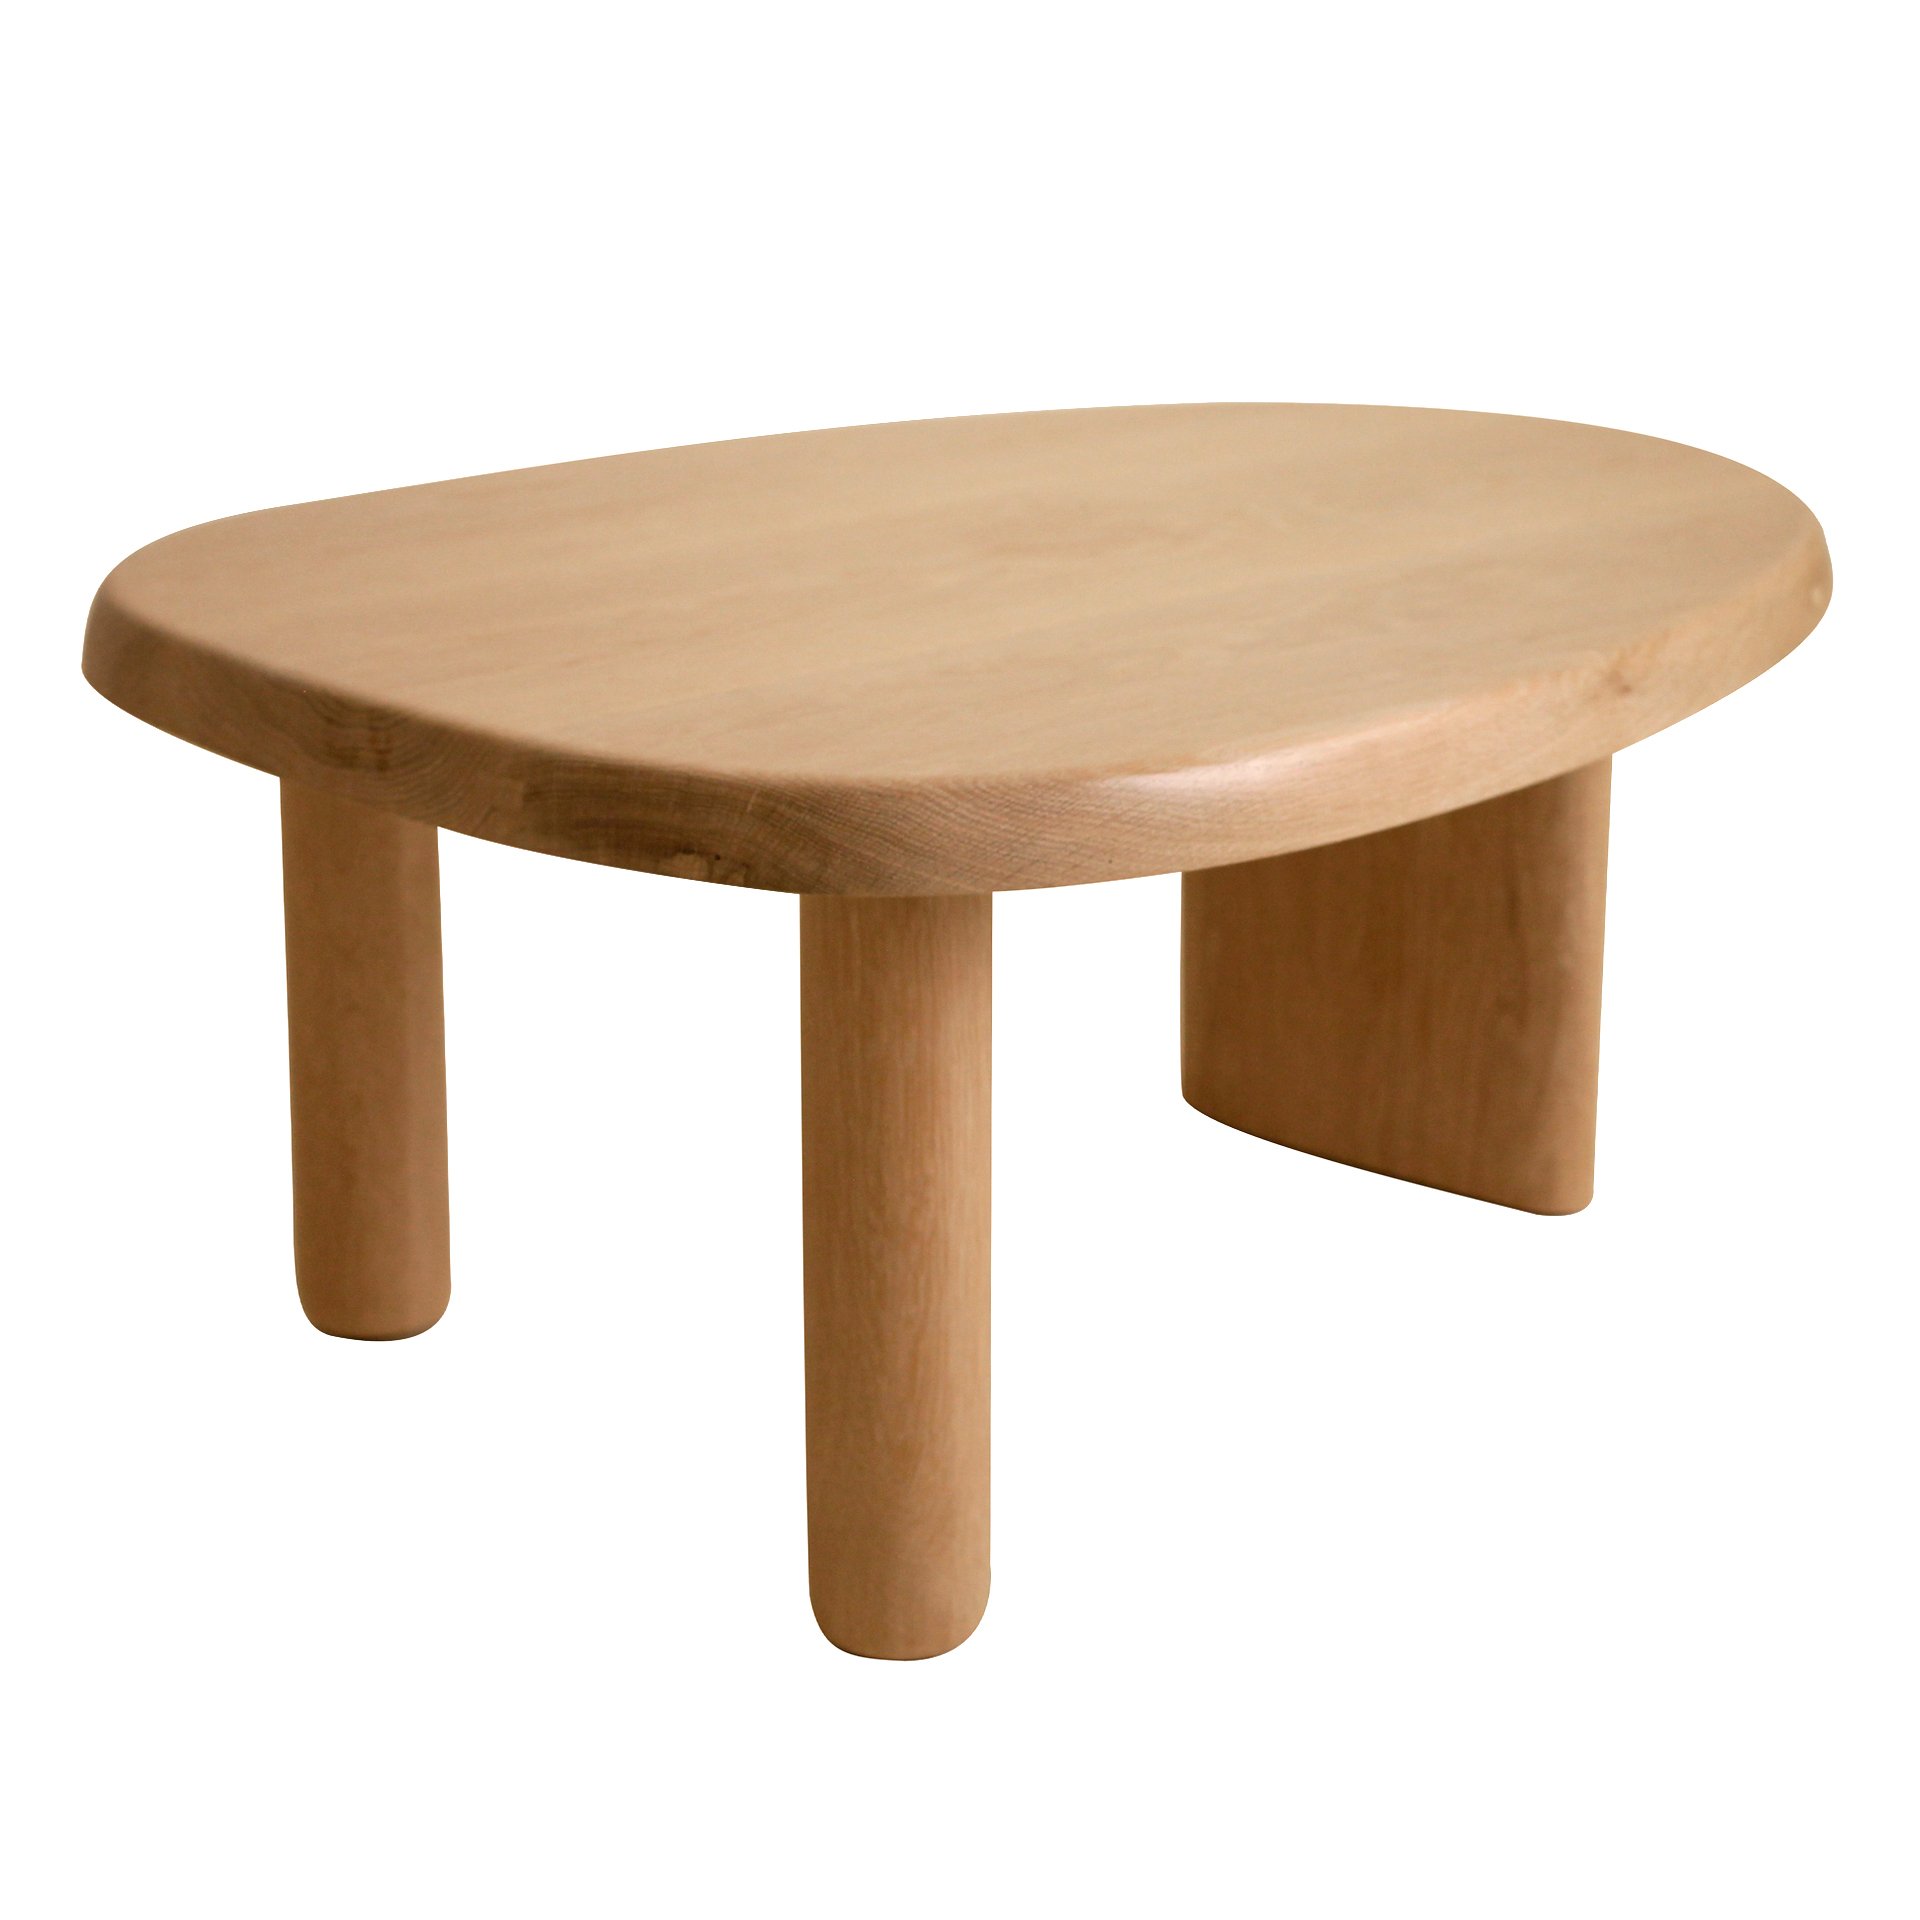 The Perriand Coffee Table